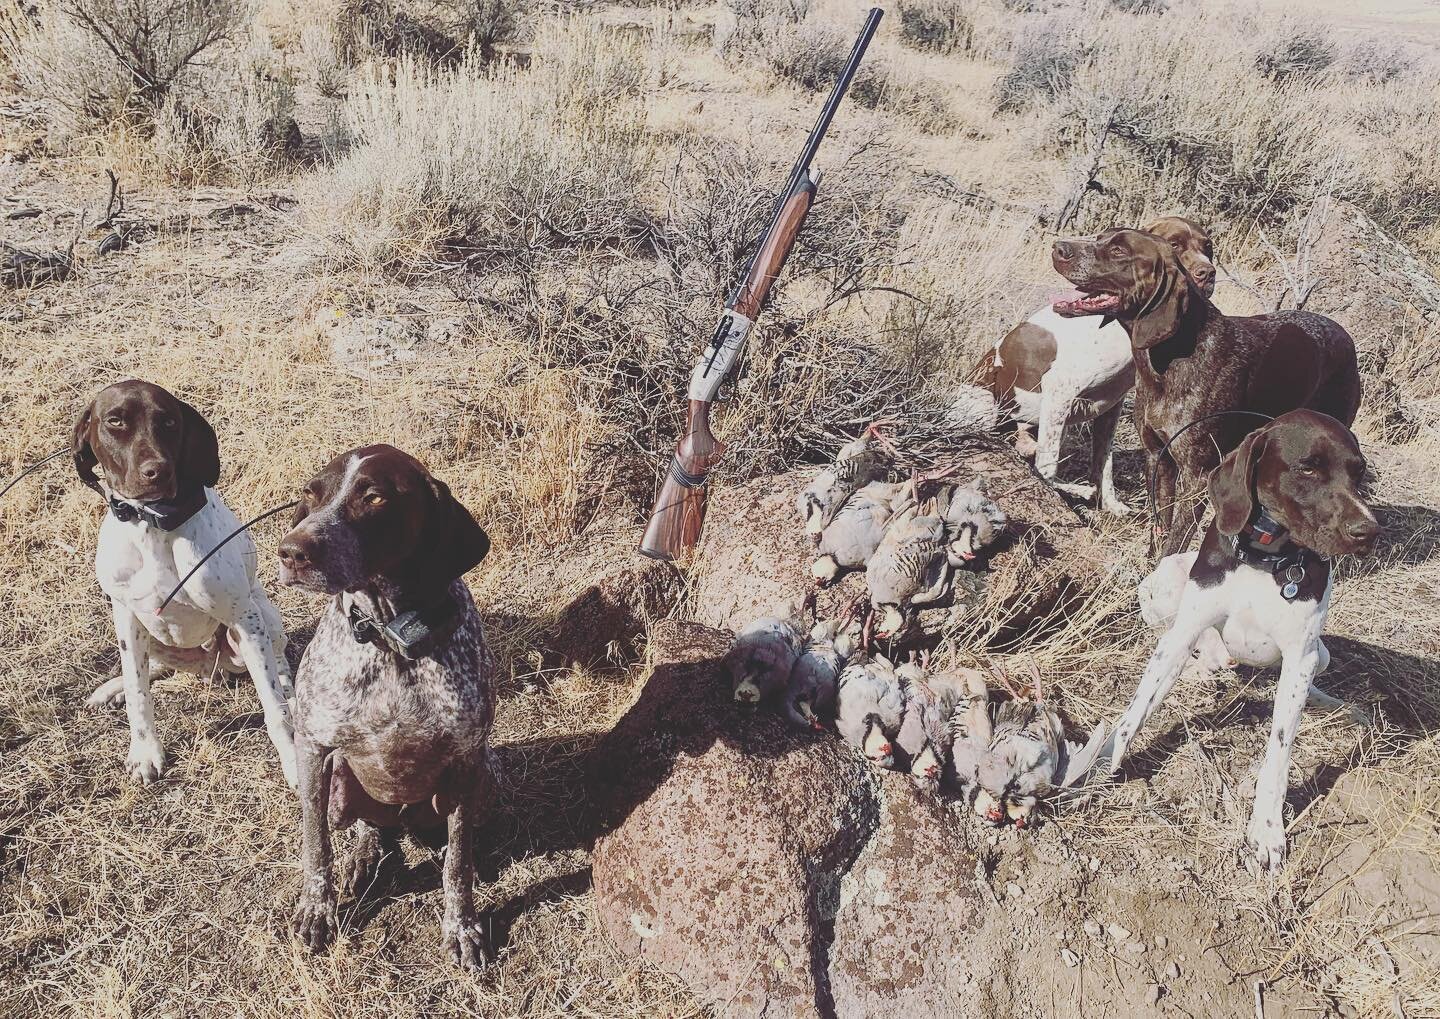 Pack-o-Pointers&mdash;Germans and Frenchies with some early season finds on wild devil birds

#chukar #chukarchasers #packofdogs #birddogs #gundog #huntingdogs #pointers